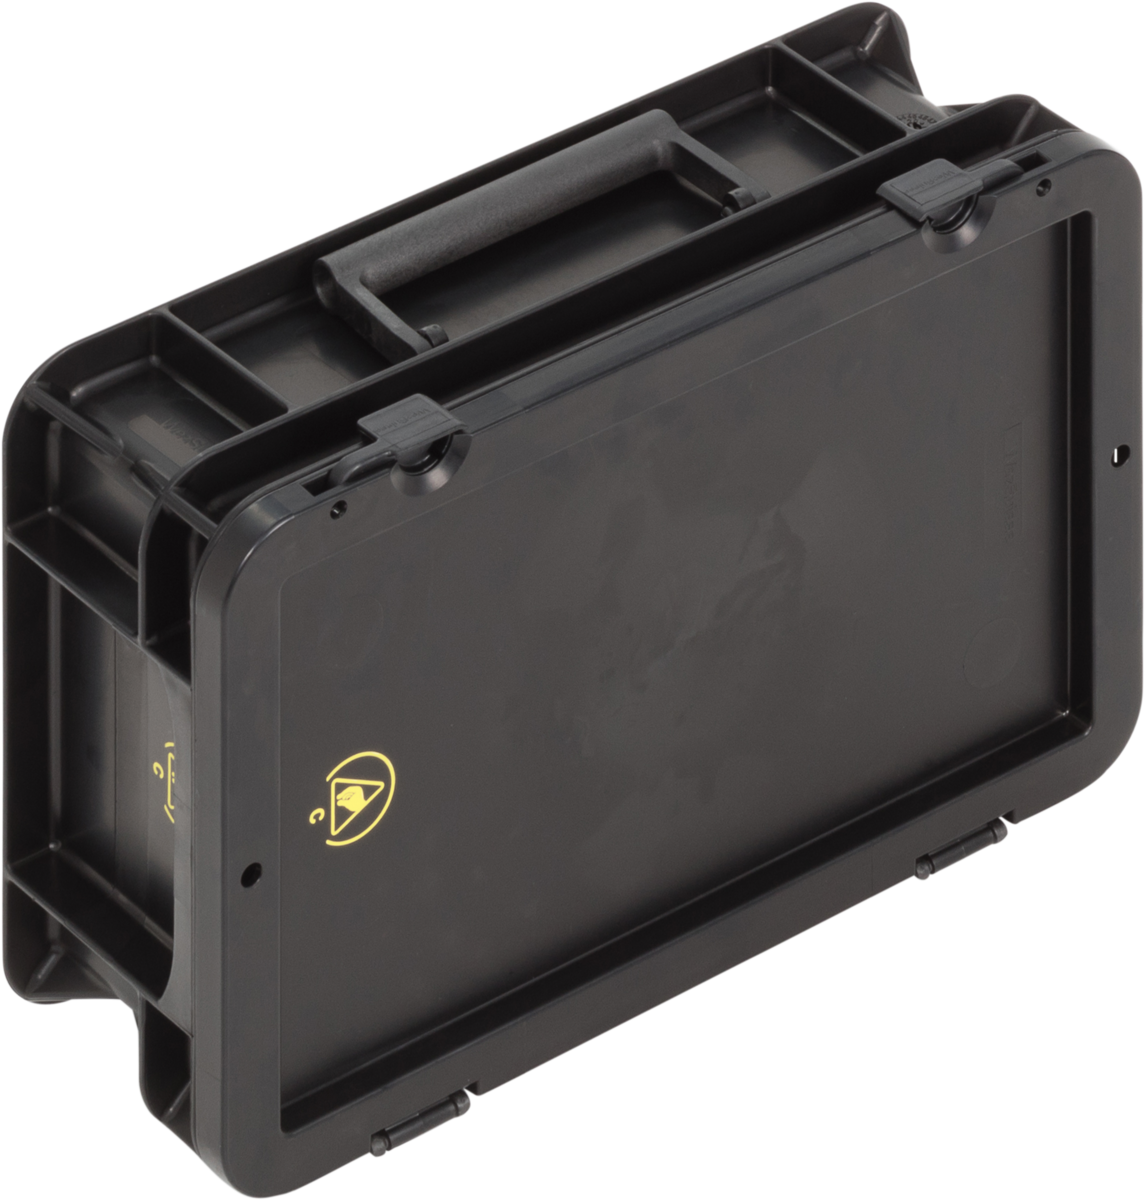 ESD-Safe-SGL-Norm-Carrying-Cases-Flat-Base-007-Ref.-3208.397.992_1004262_300x200x110_03